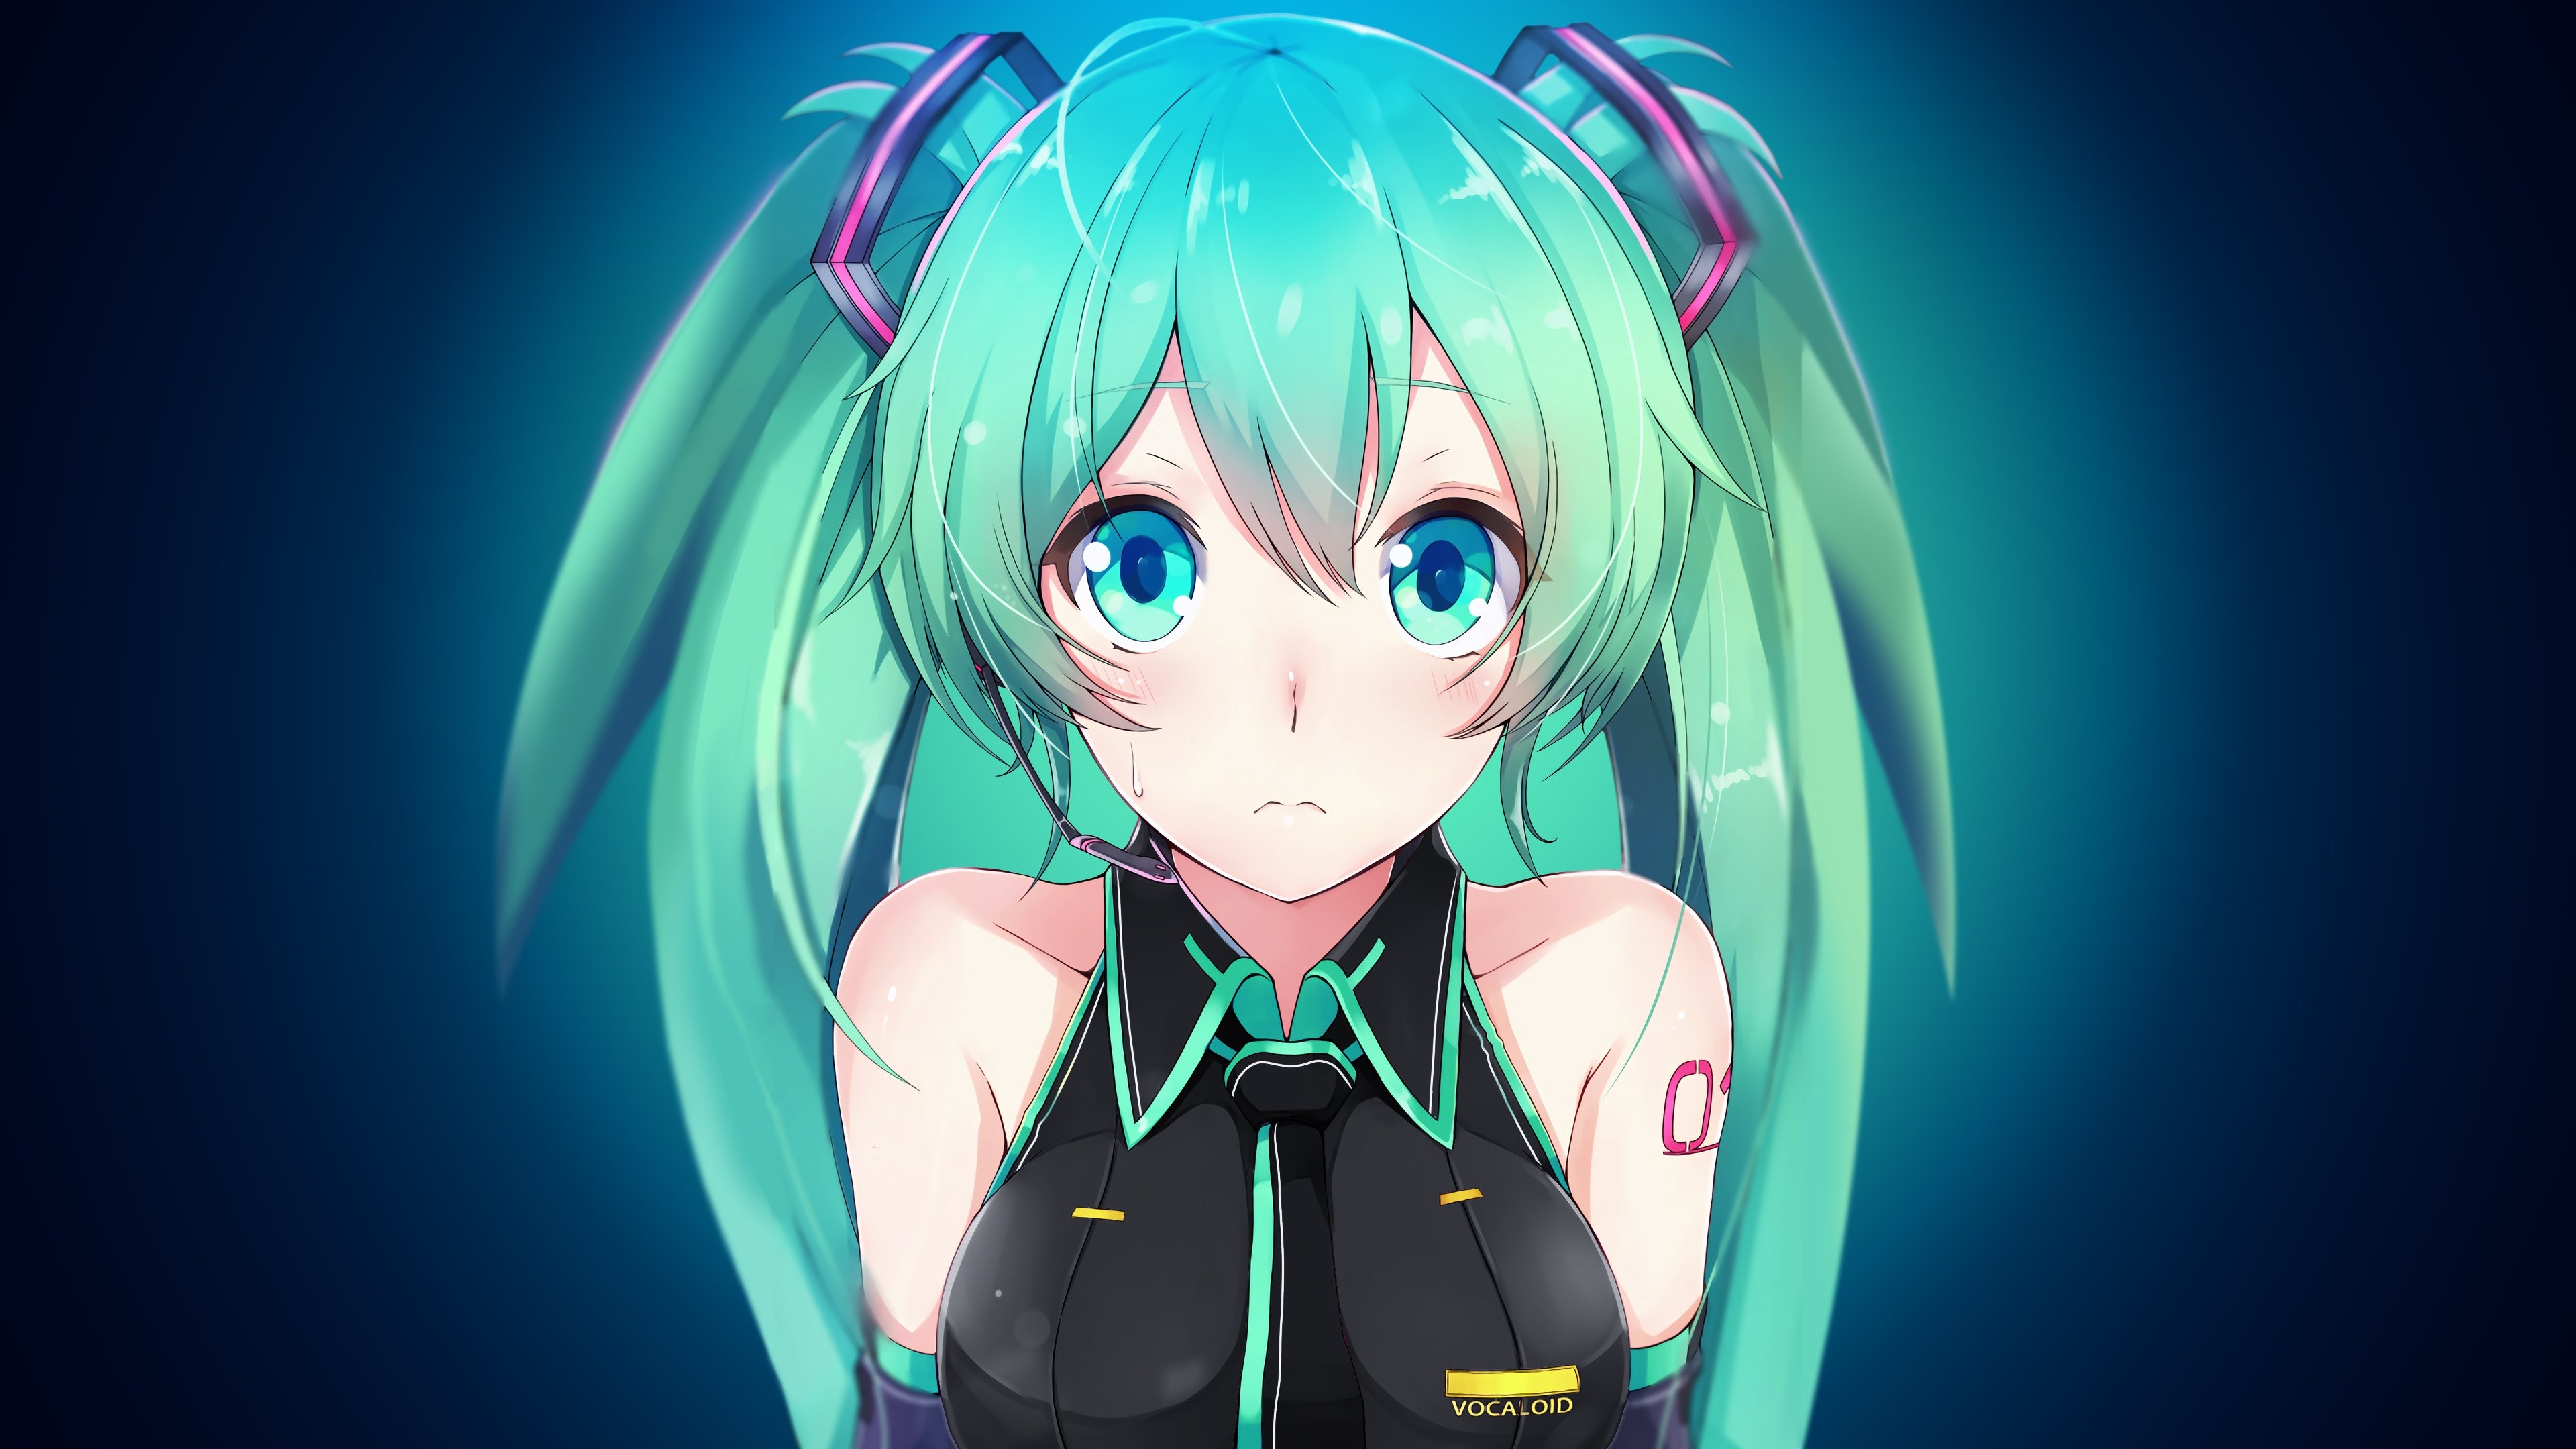 Vocaloid Anime girl 4K Wallpapers